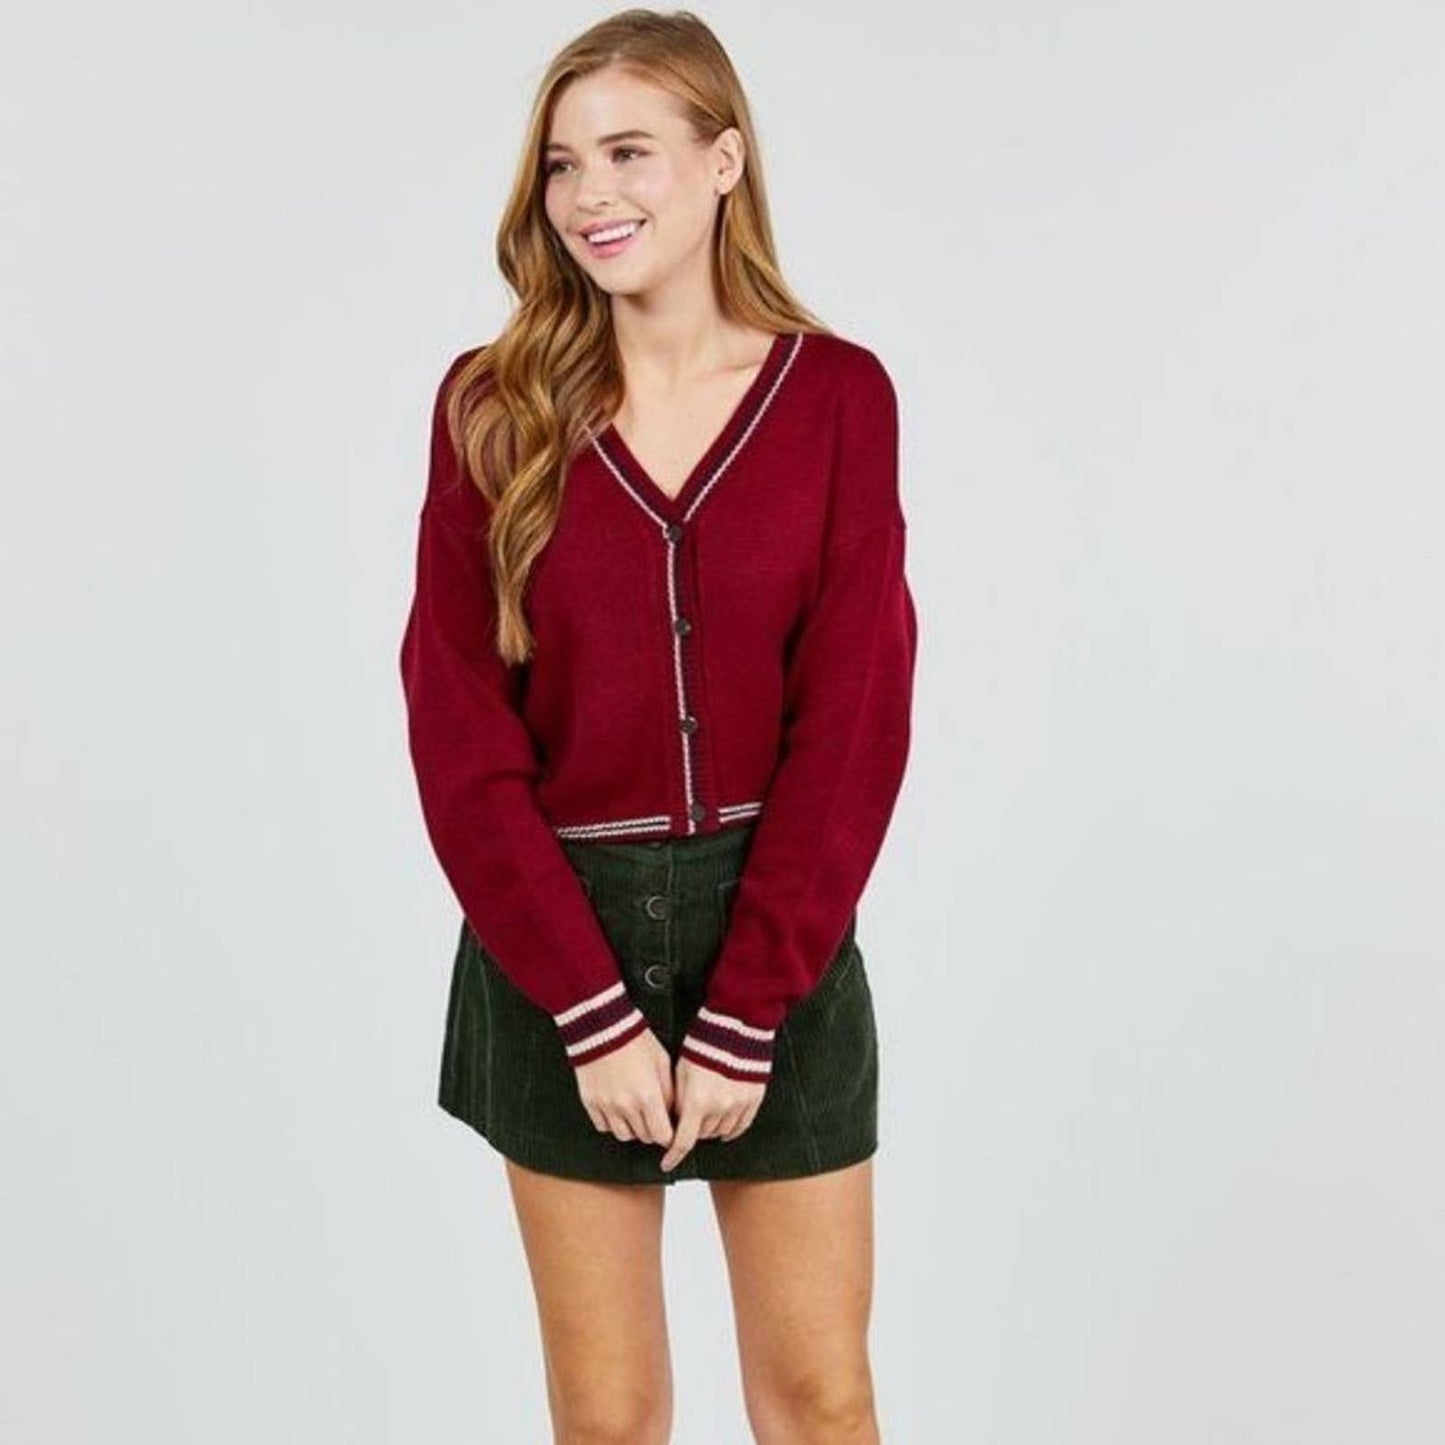 College Varsity cropped sweater NWT